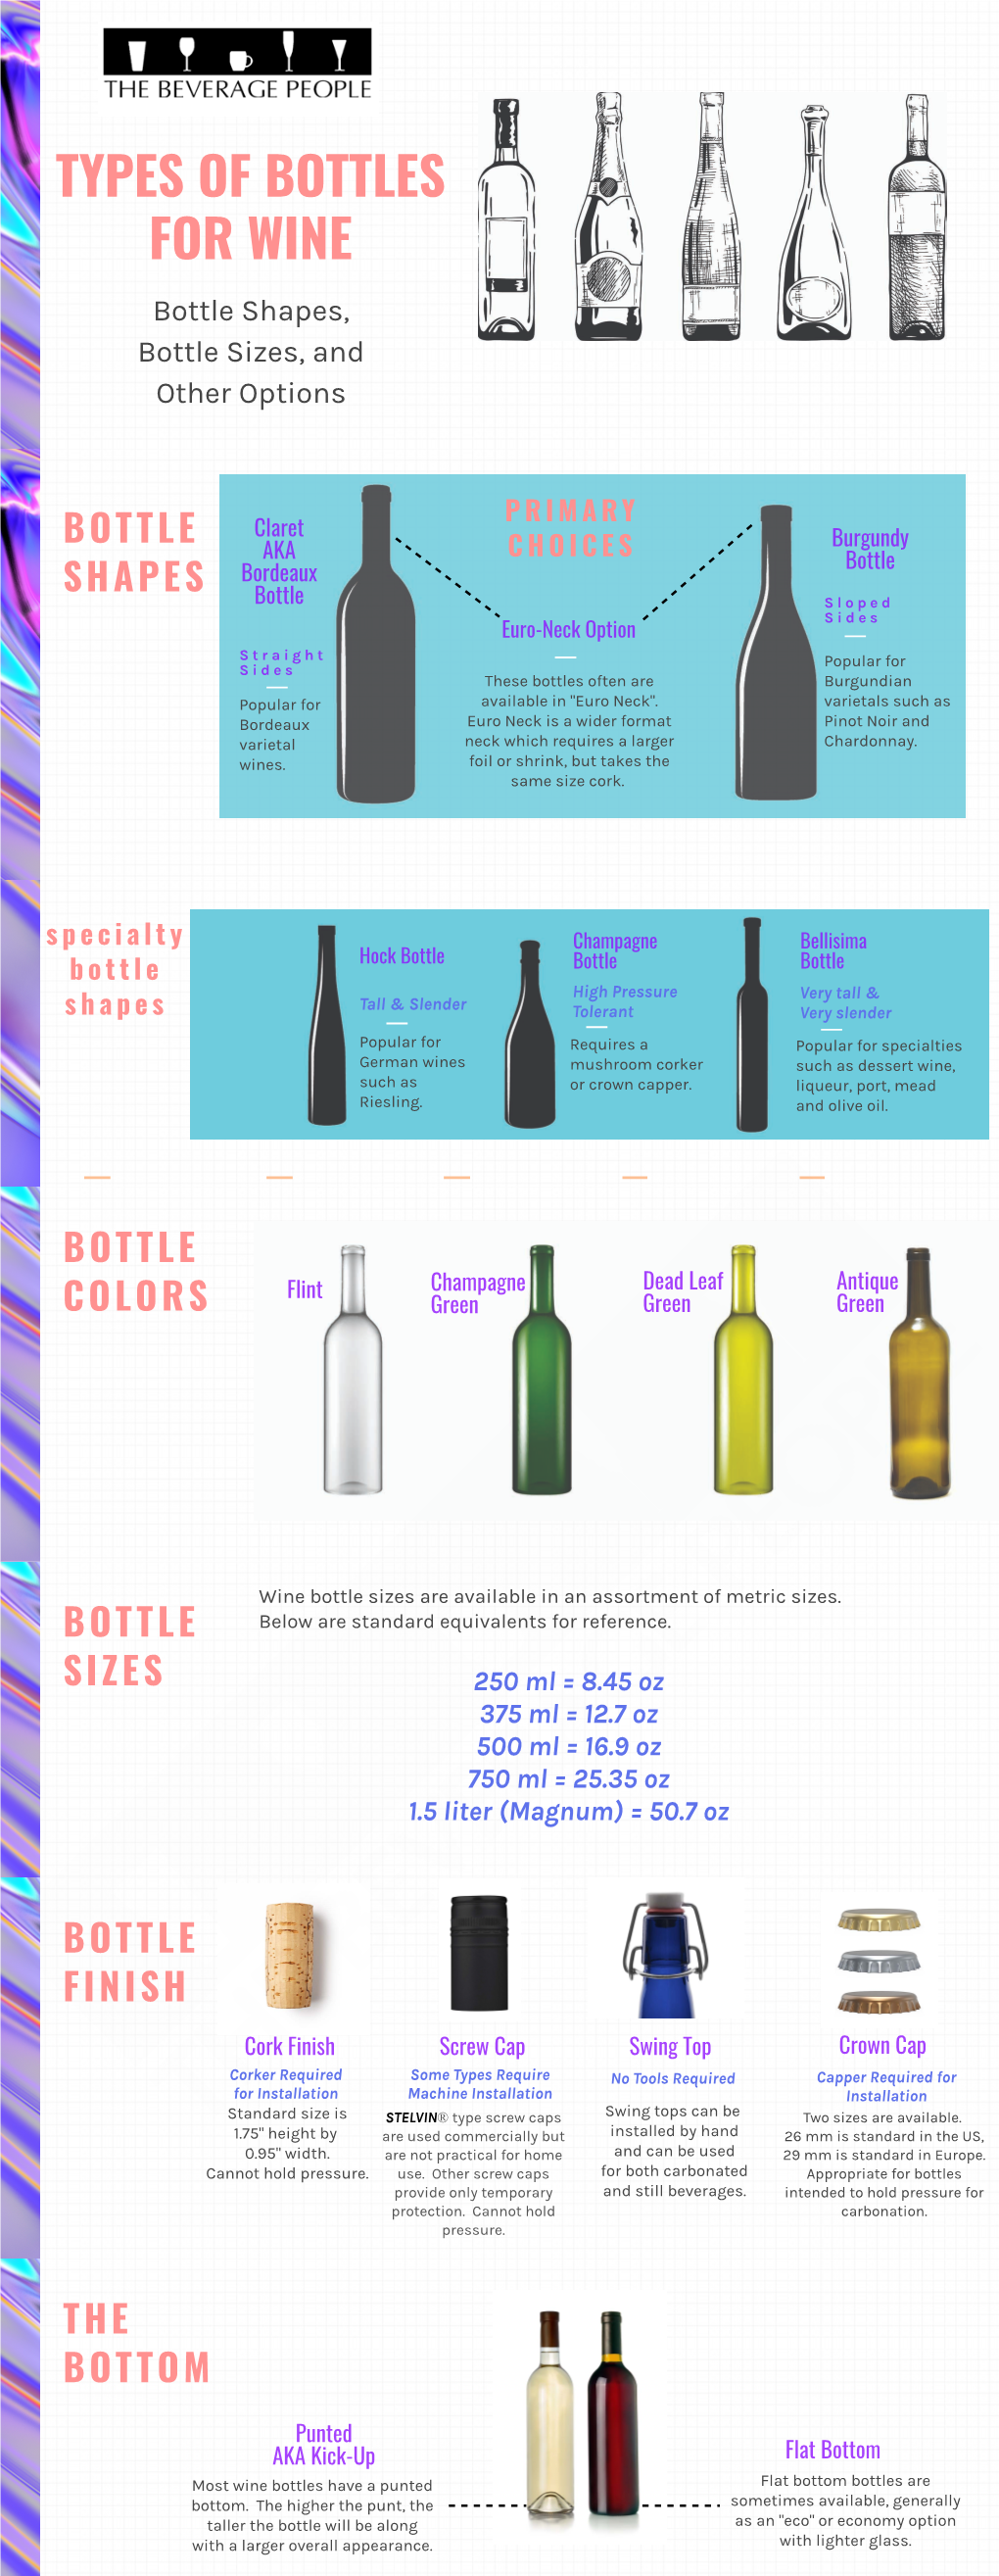 Bottle Shapes, Bottle Sizes, and Other Options